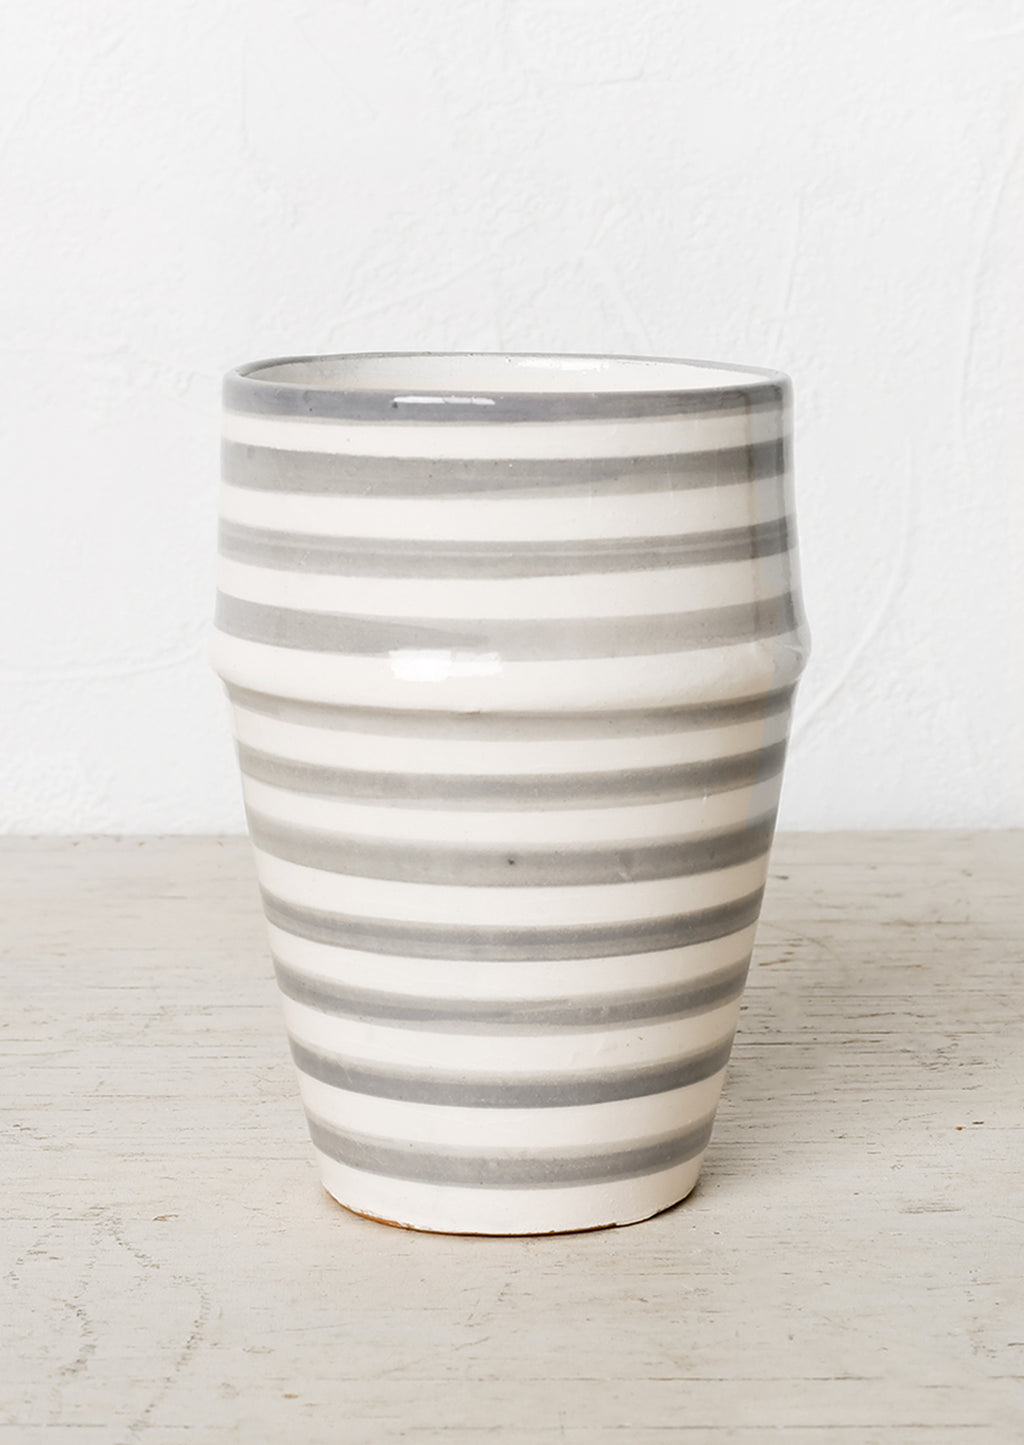 Grey: A moroccan style ceramic cup in grey and white stripes.